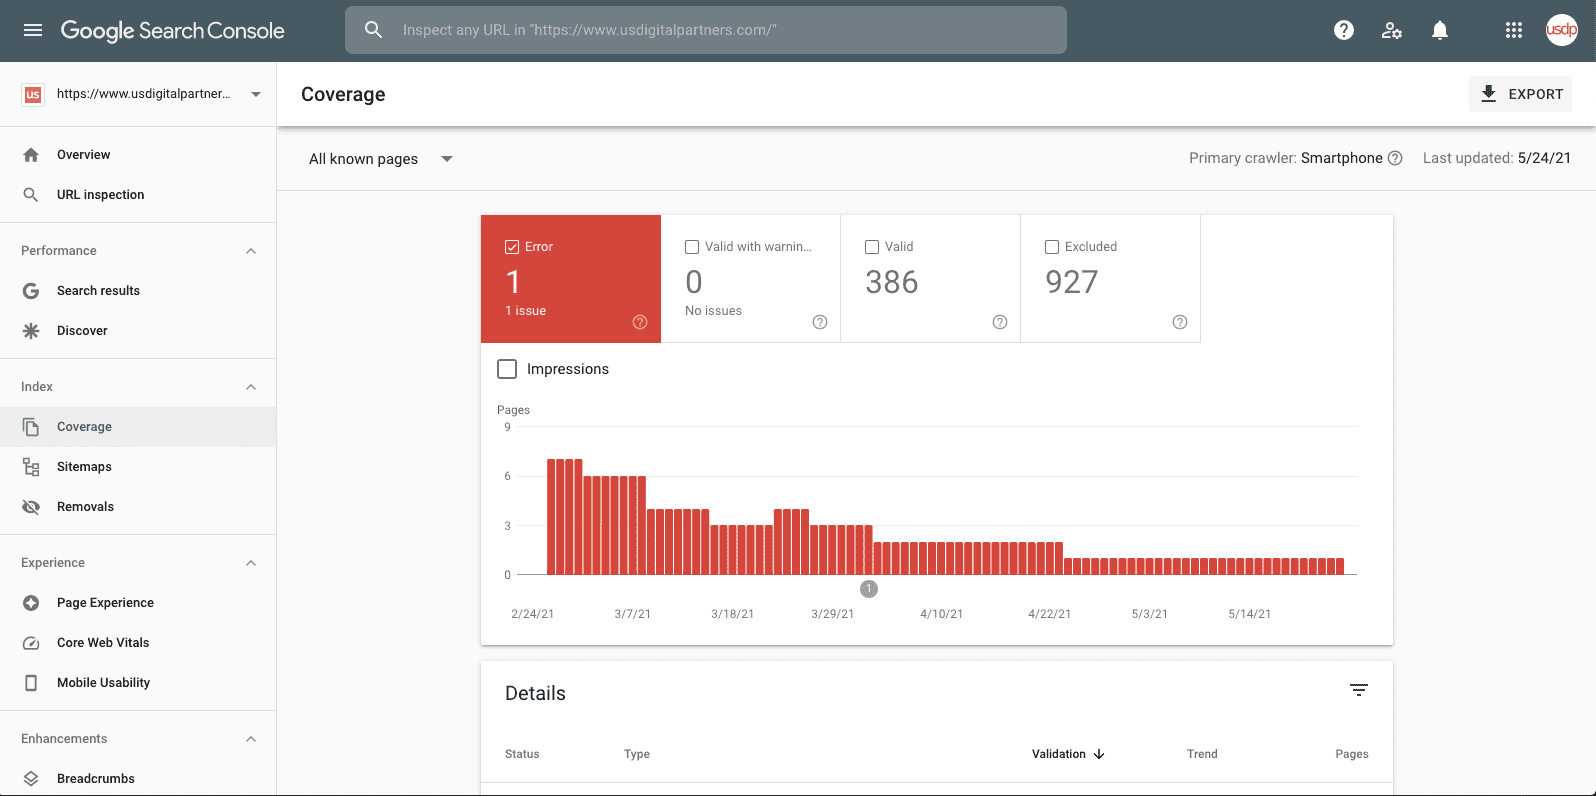 Coverage Tab in Google Search Console